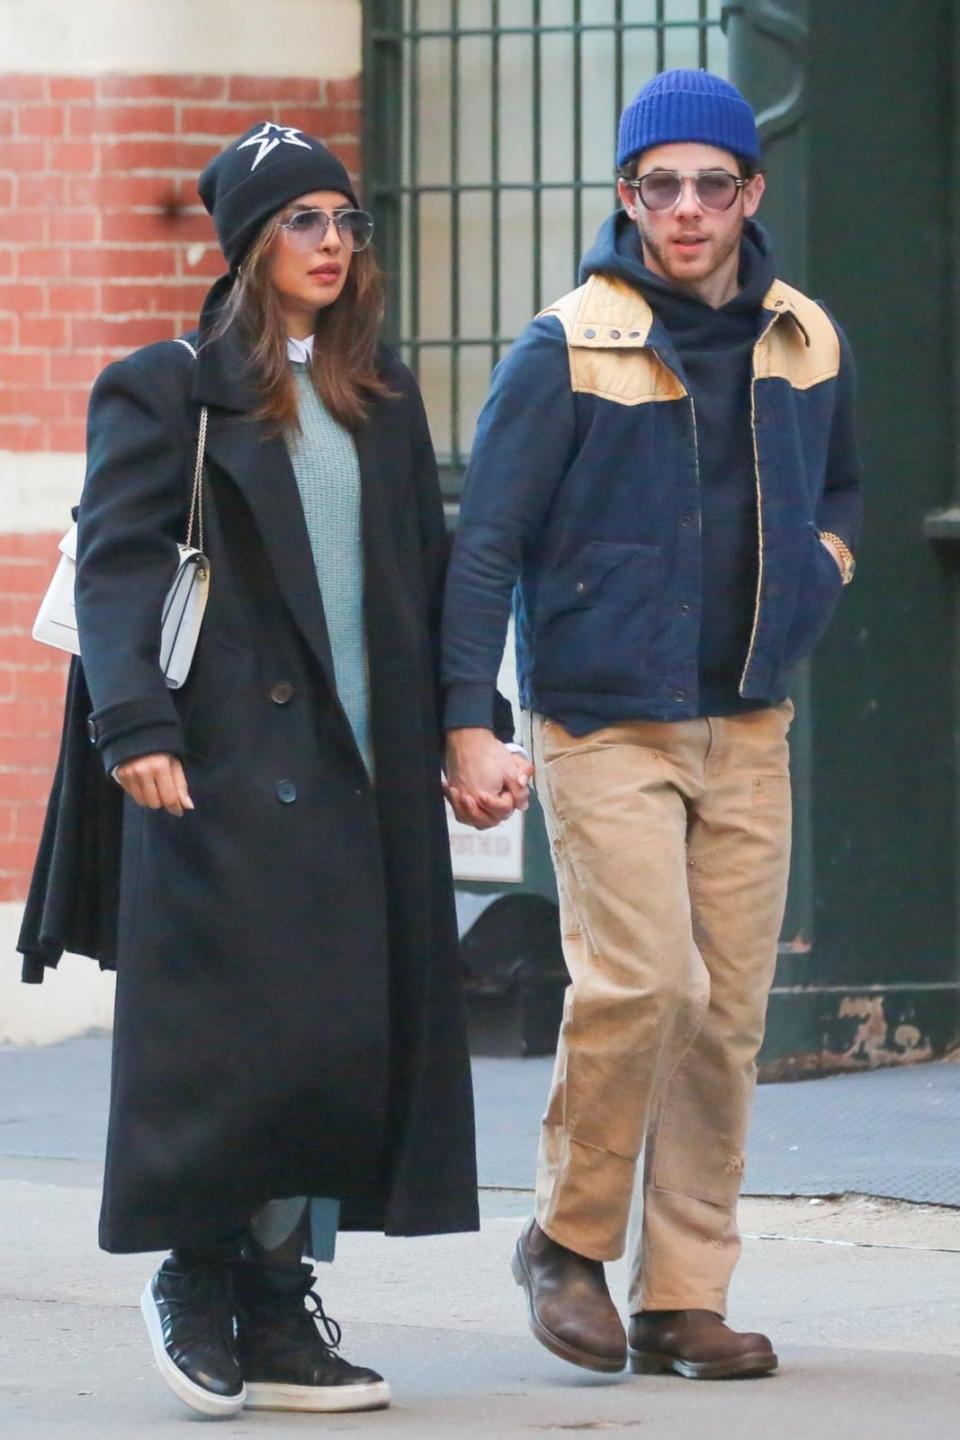 PHOTO: Priyanka Chopra and Nick Jonas are seen on November 30, 2023 in New York City. (GC Images via Getty Images, FILE)